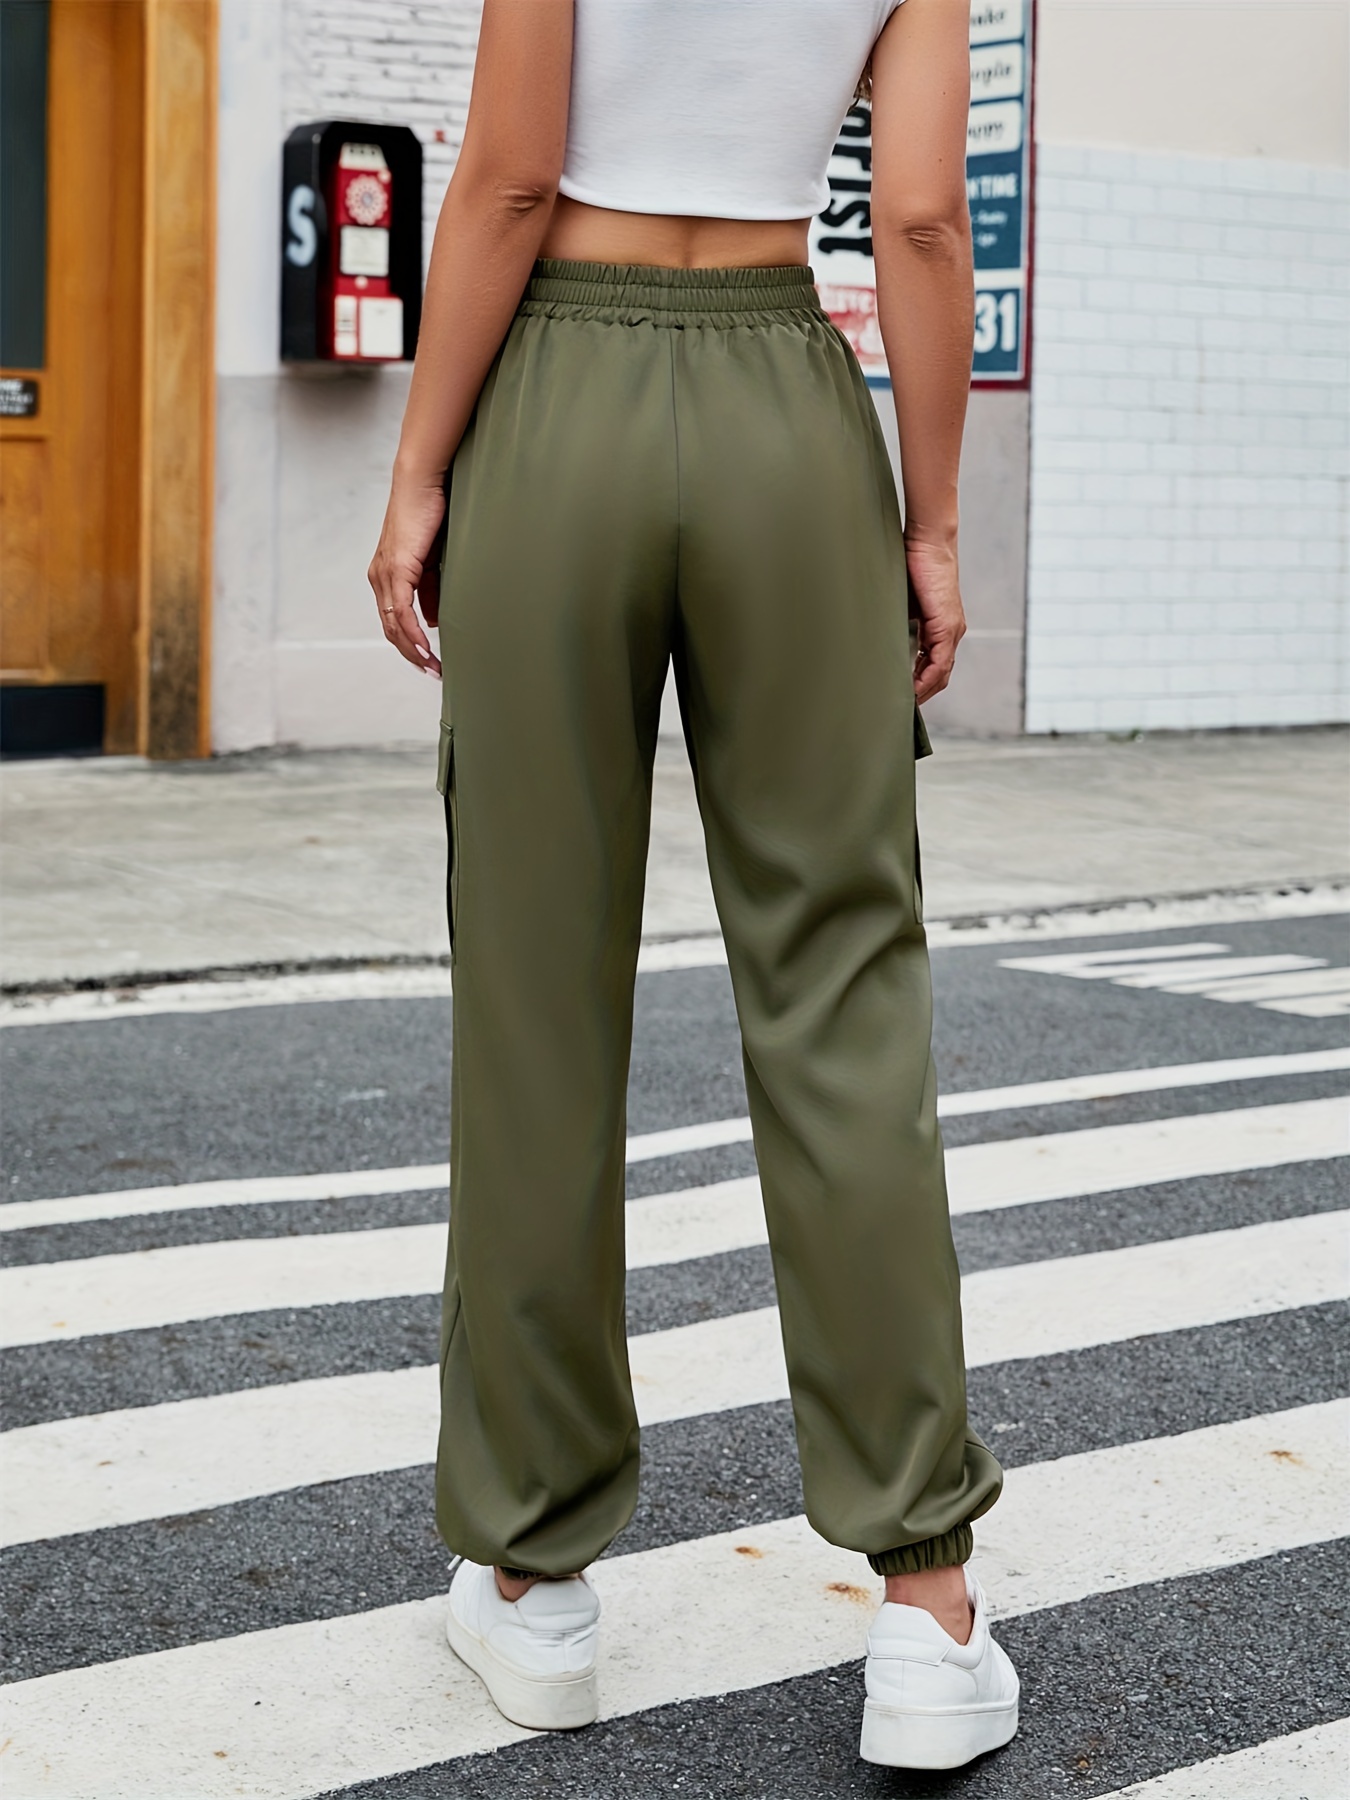 15 Oversized Pants Outfits For This Fall - Styleoholic